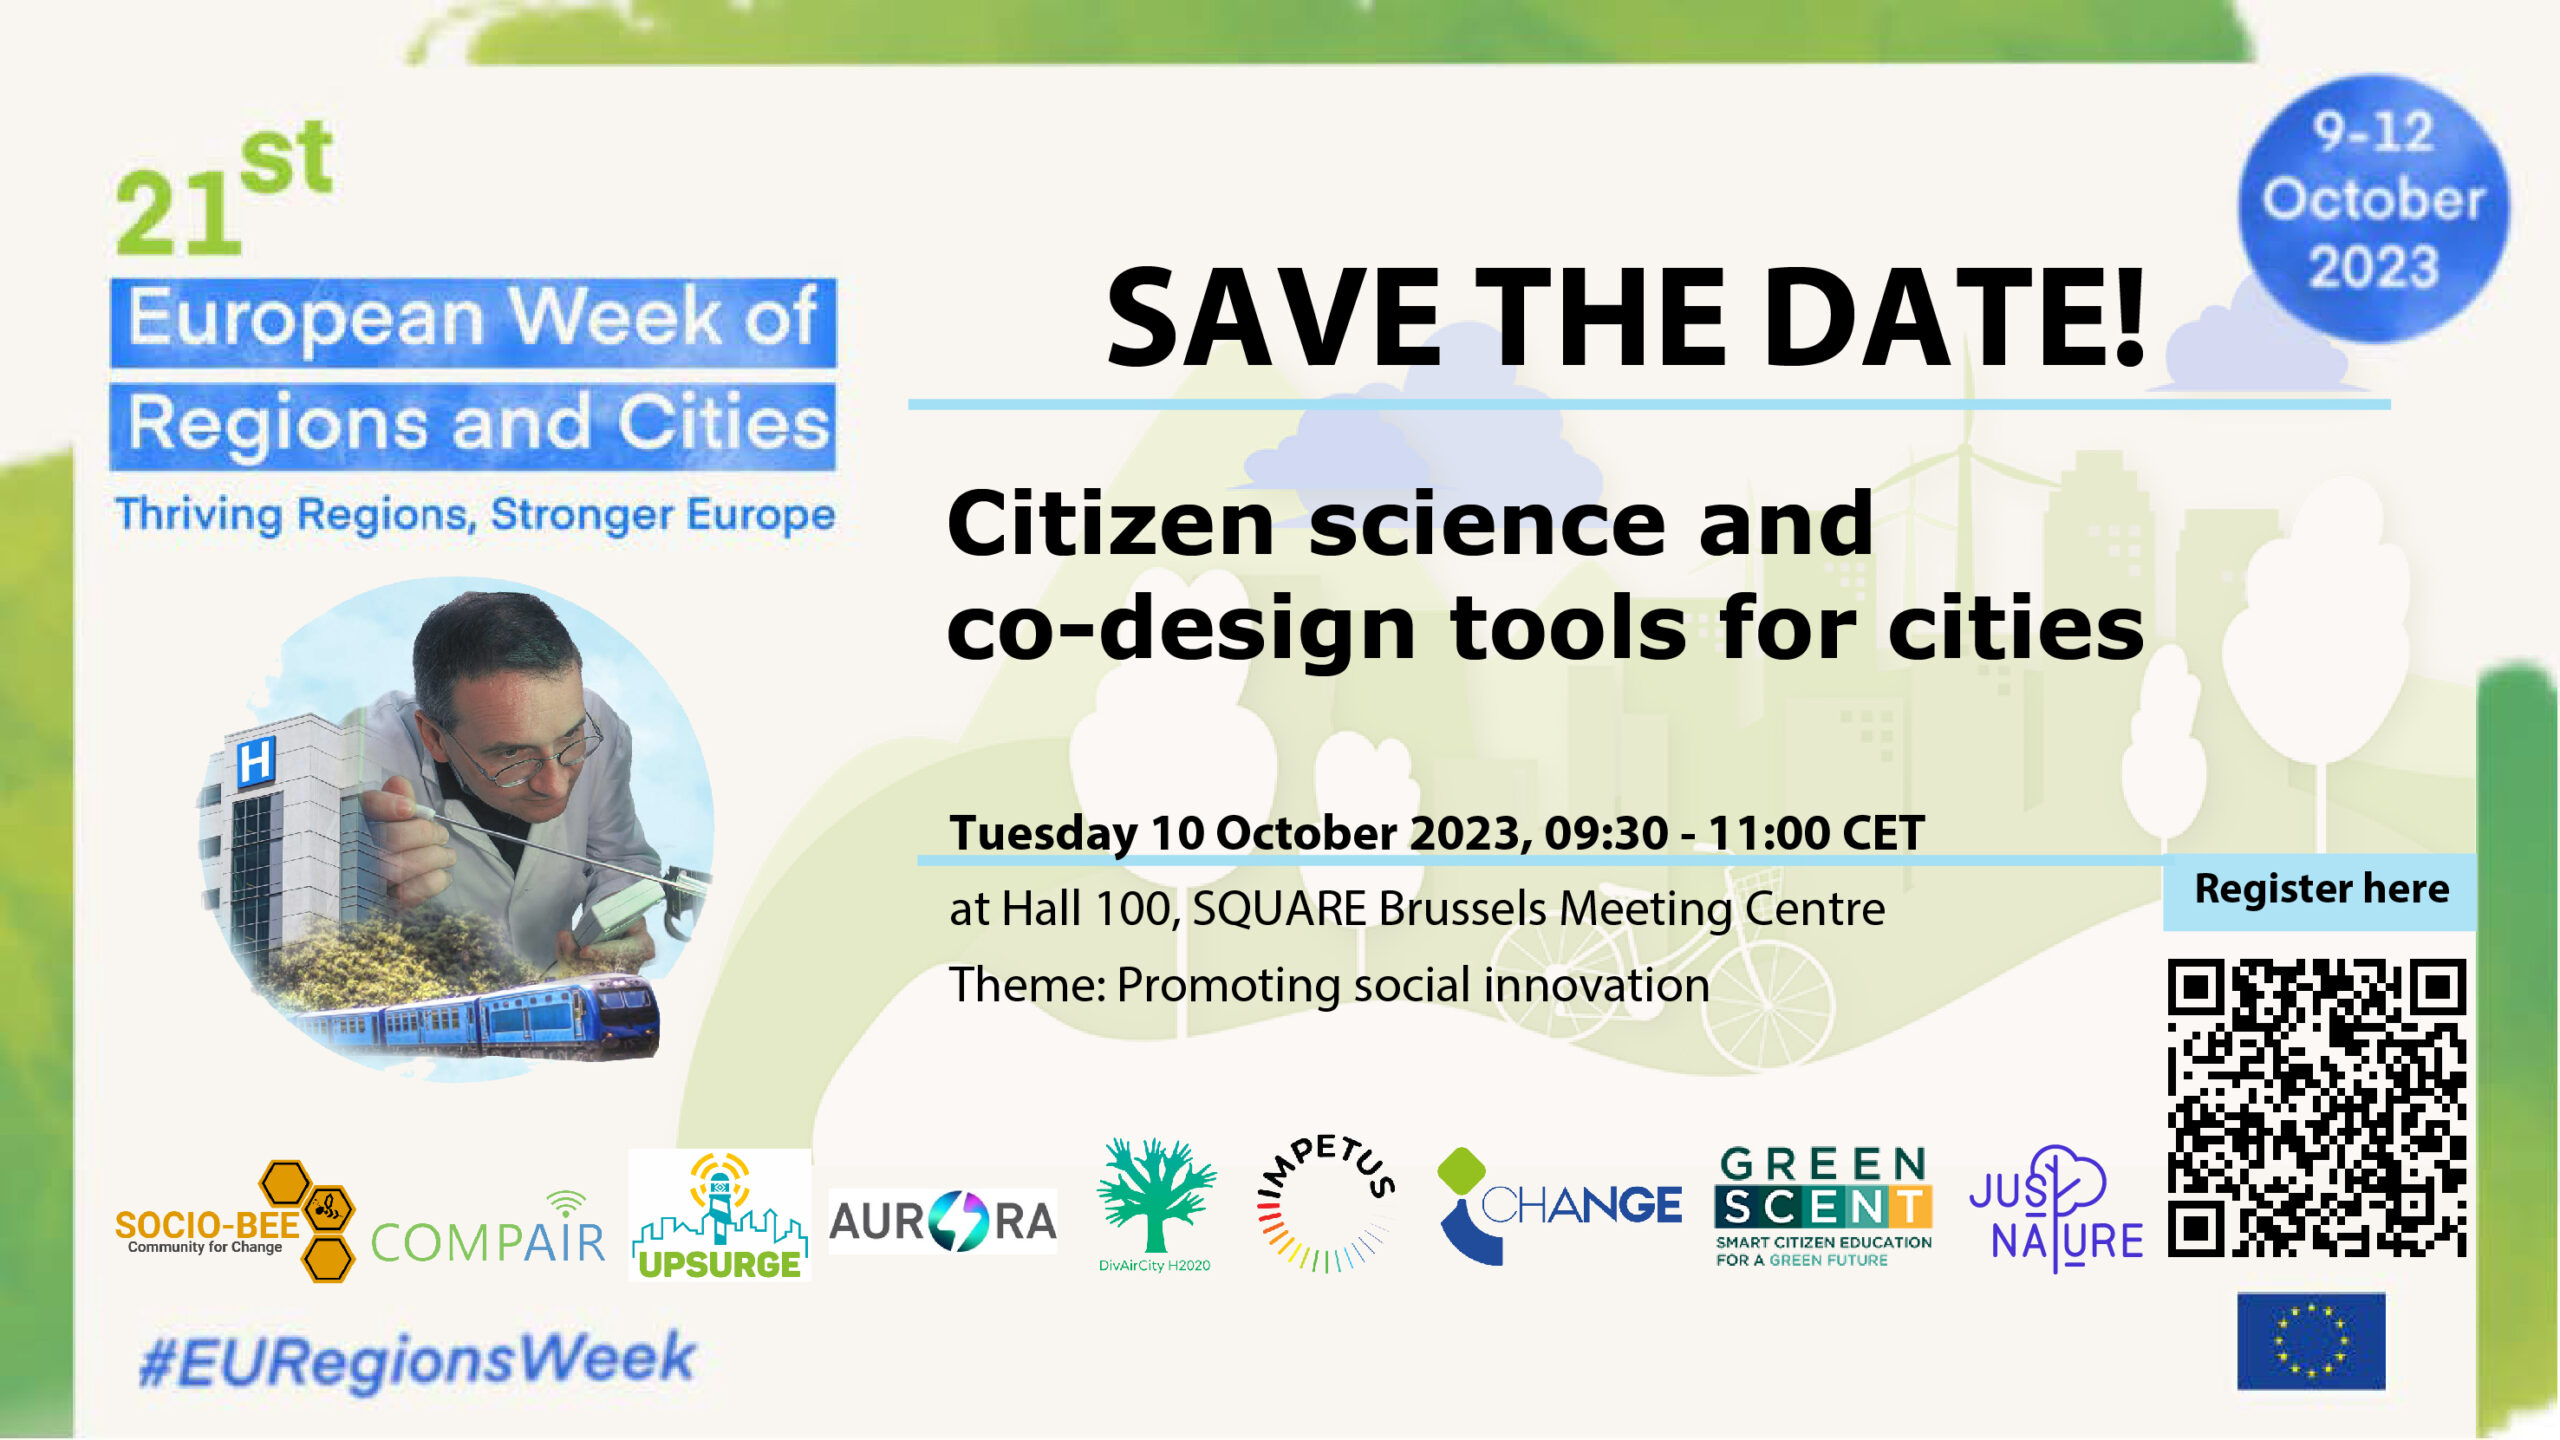 Citizen science and co-design tools for cities